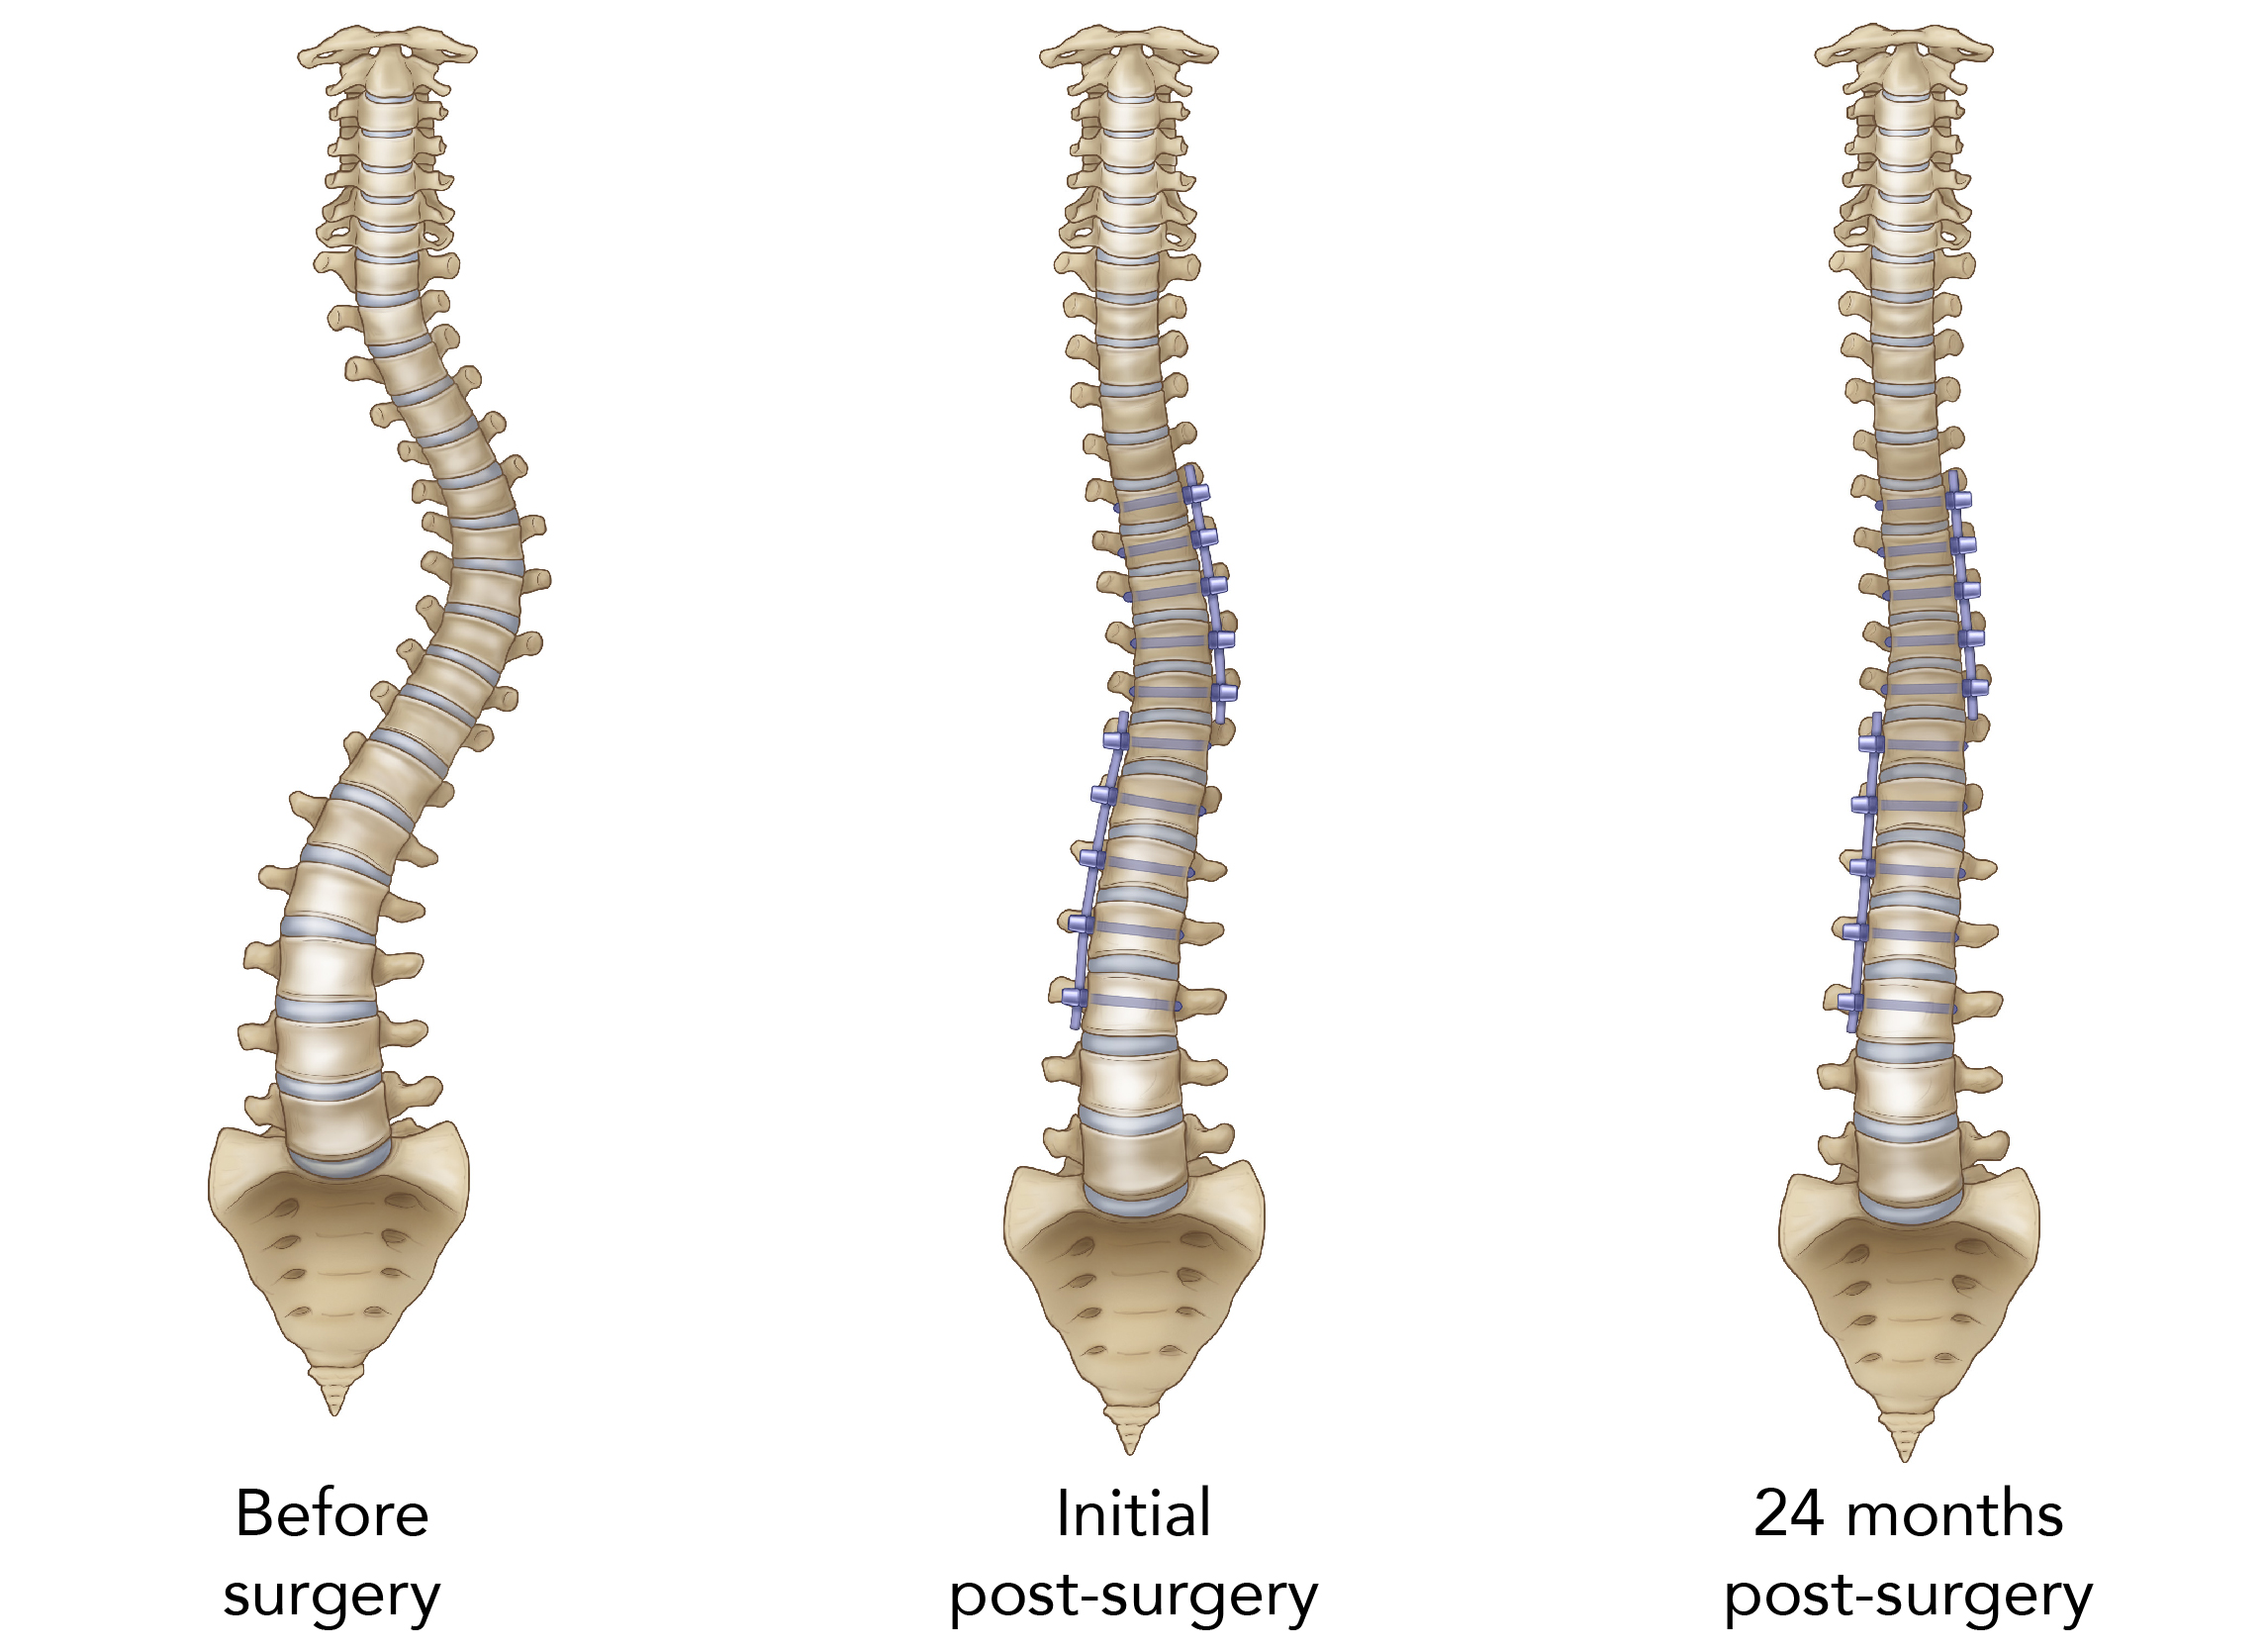 illustration of three spines showing a curved spine, a spine immediately after avt surgery with a tethering device on the spine, and a third spine two years after surgery with the tethering device still intact